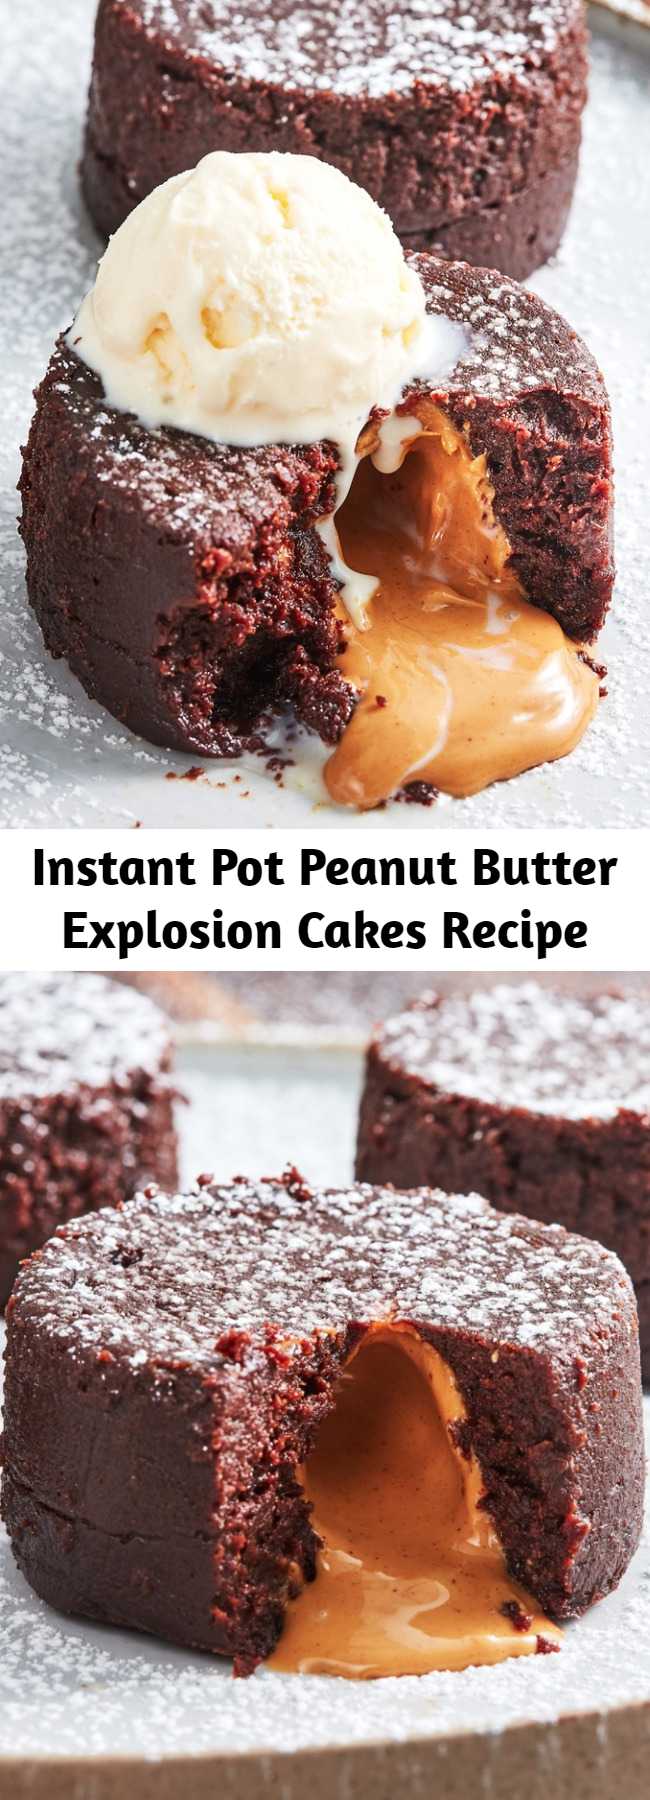 Instant Pot Peanut Butter Explosion Cakes Recipe - The Instant Pot makes the best molten cakes, hands-down. It gently cooks them to pure decadence. The cake is so rich with a perfectly creamy center that's to die for. We're obsessed with this cake, and soon you will be, too.